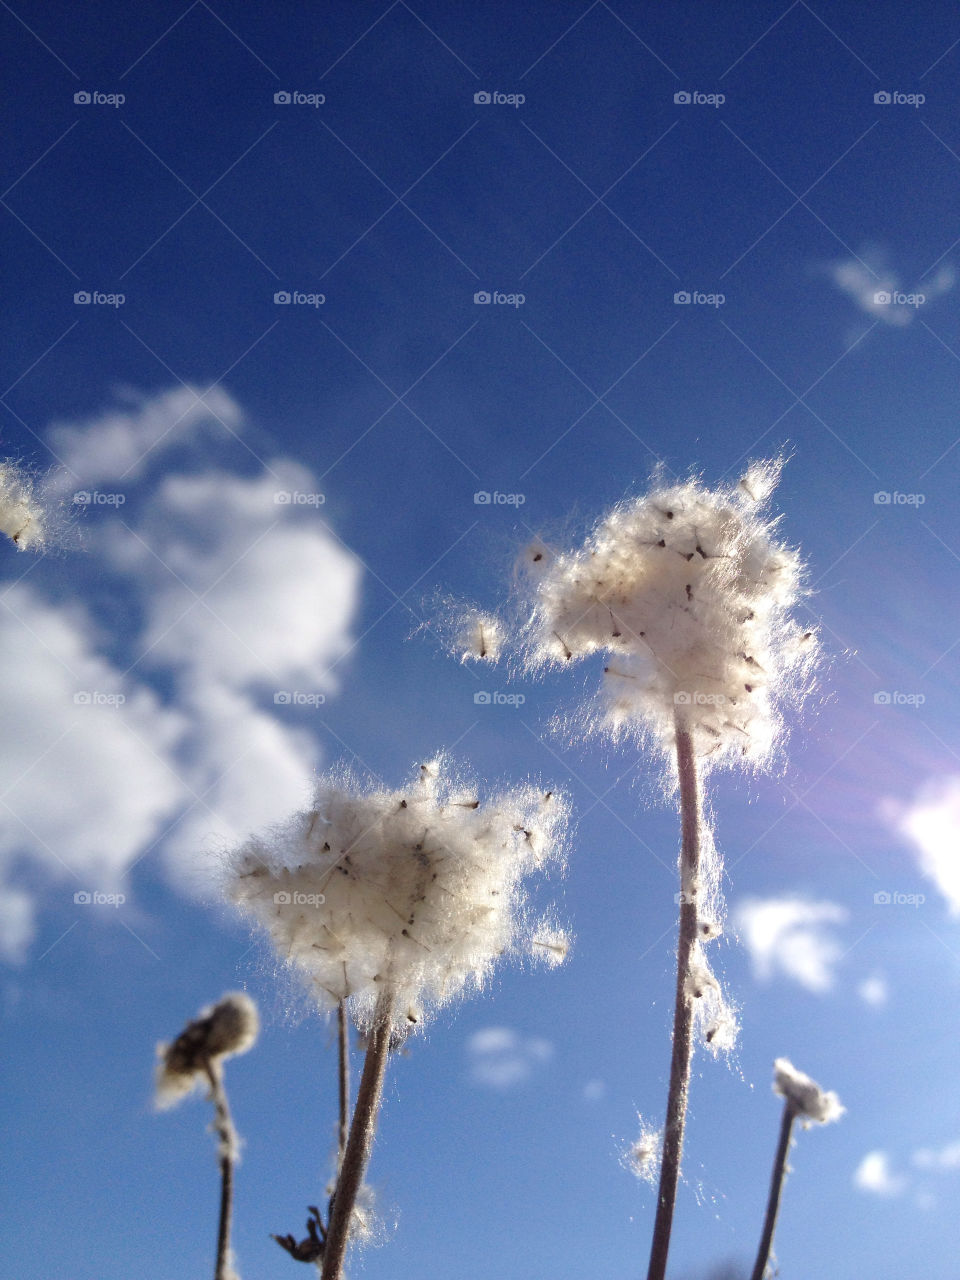 Low angle view of weathered dandelion flower